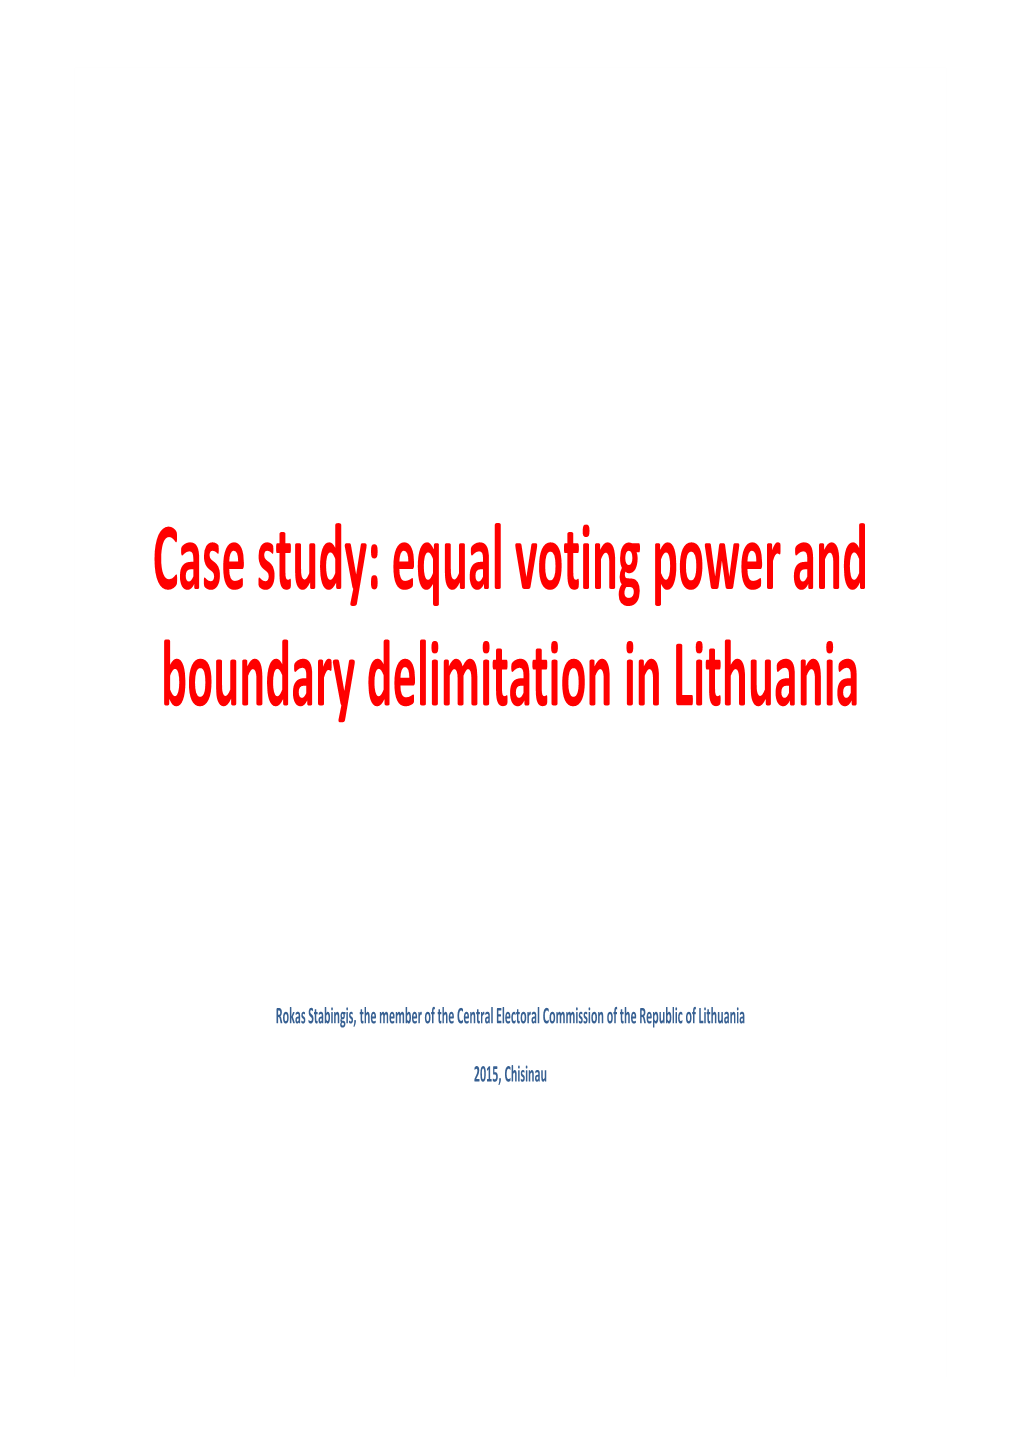 Case Study: Equal Voting Power and Boundary Delimitation in Lithuania